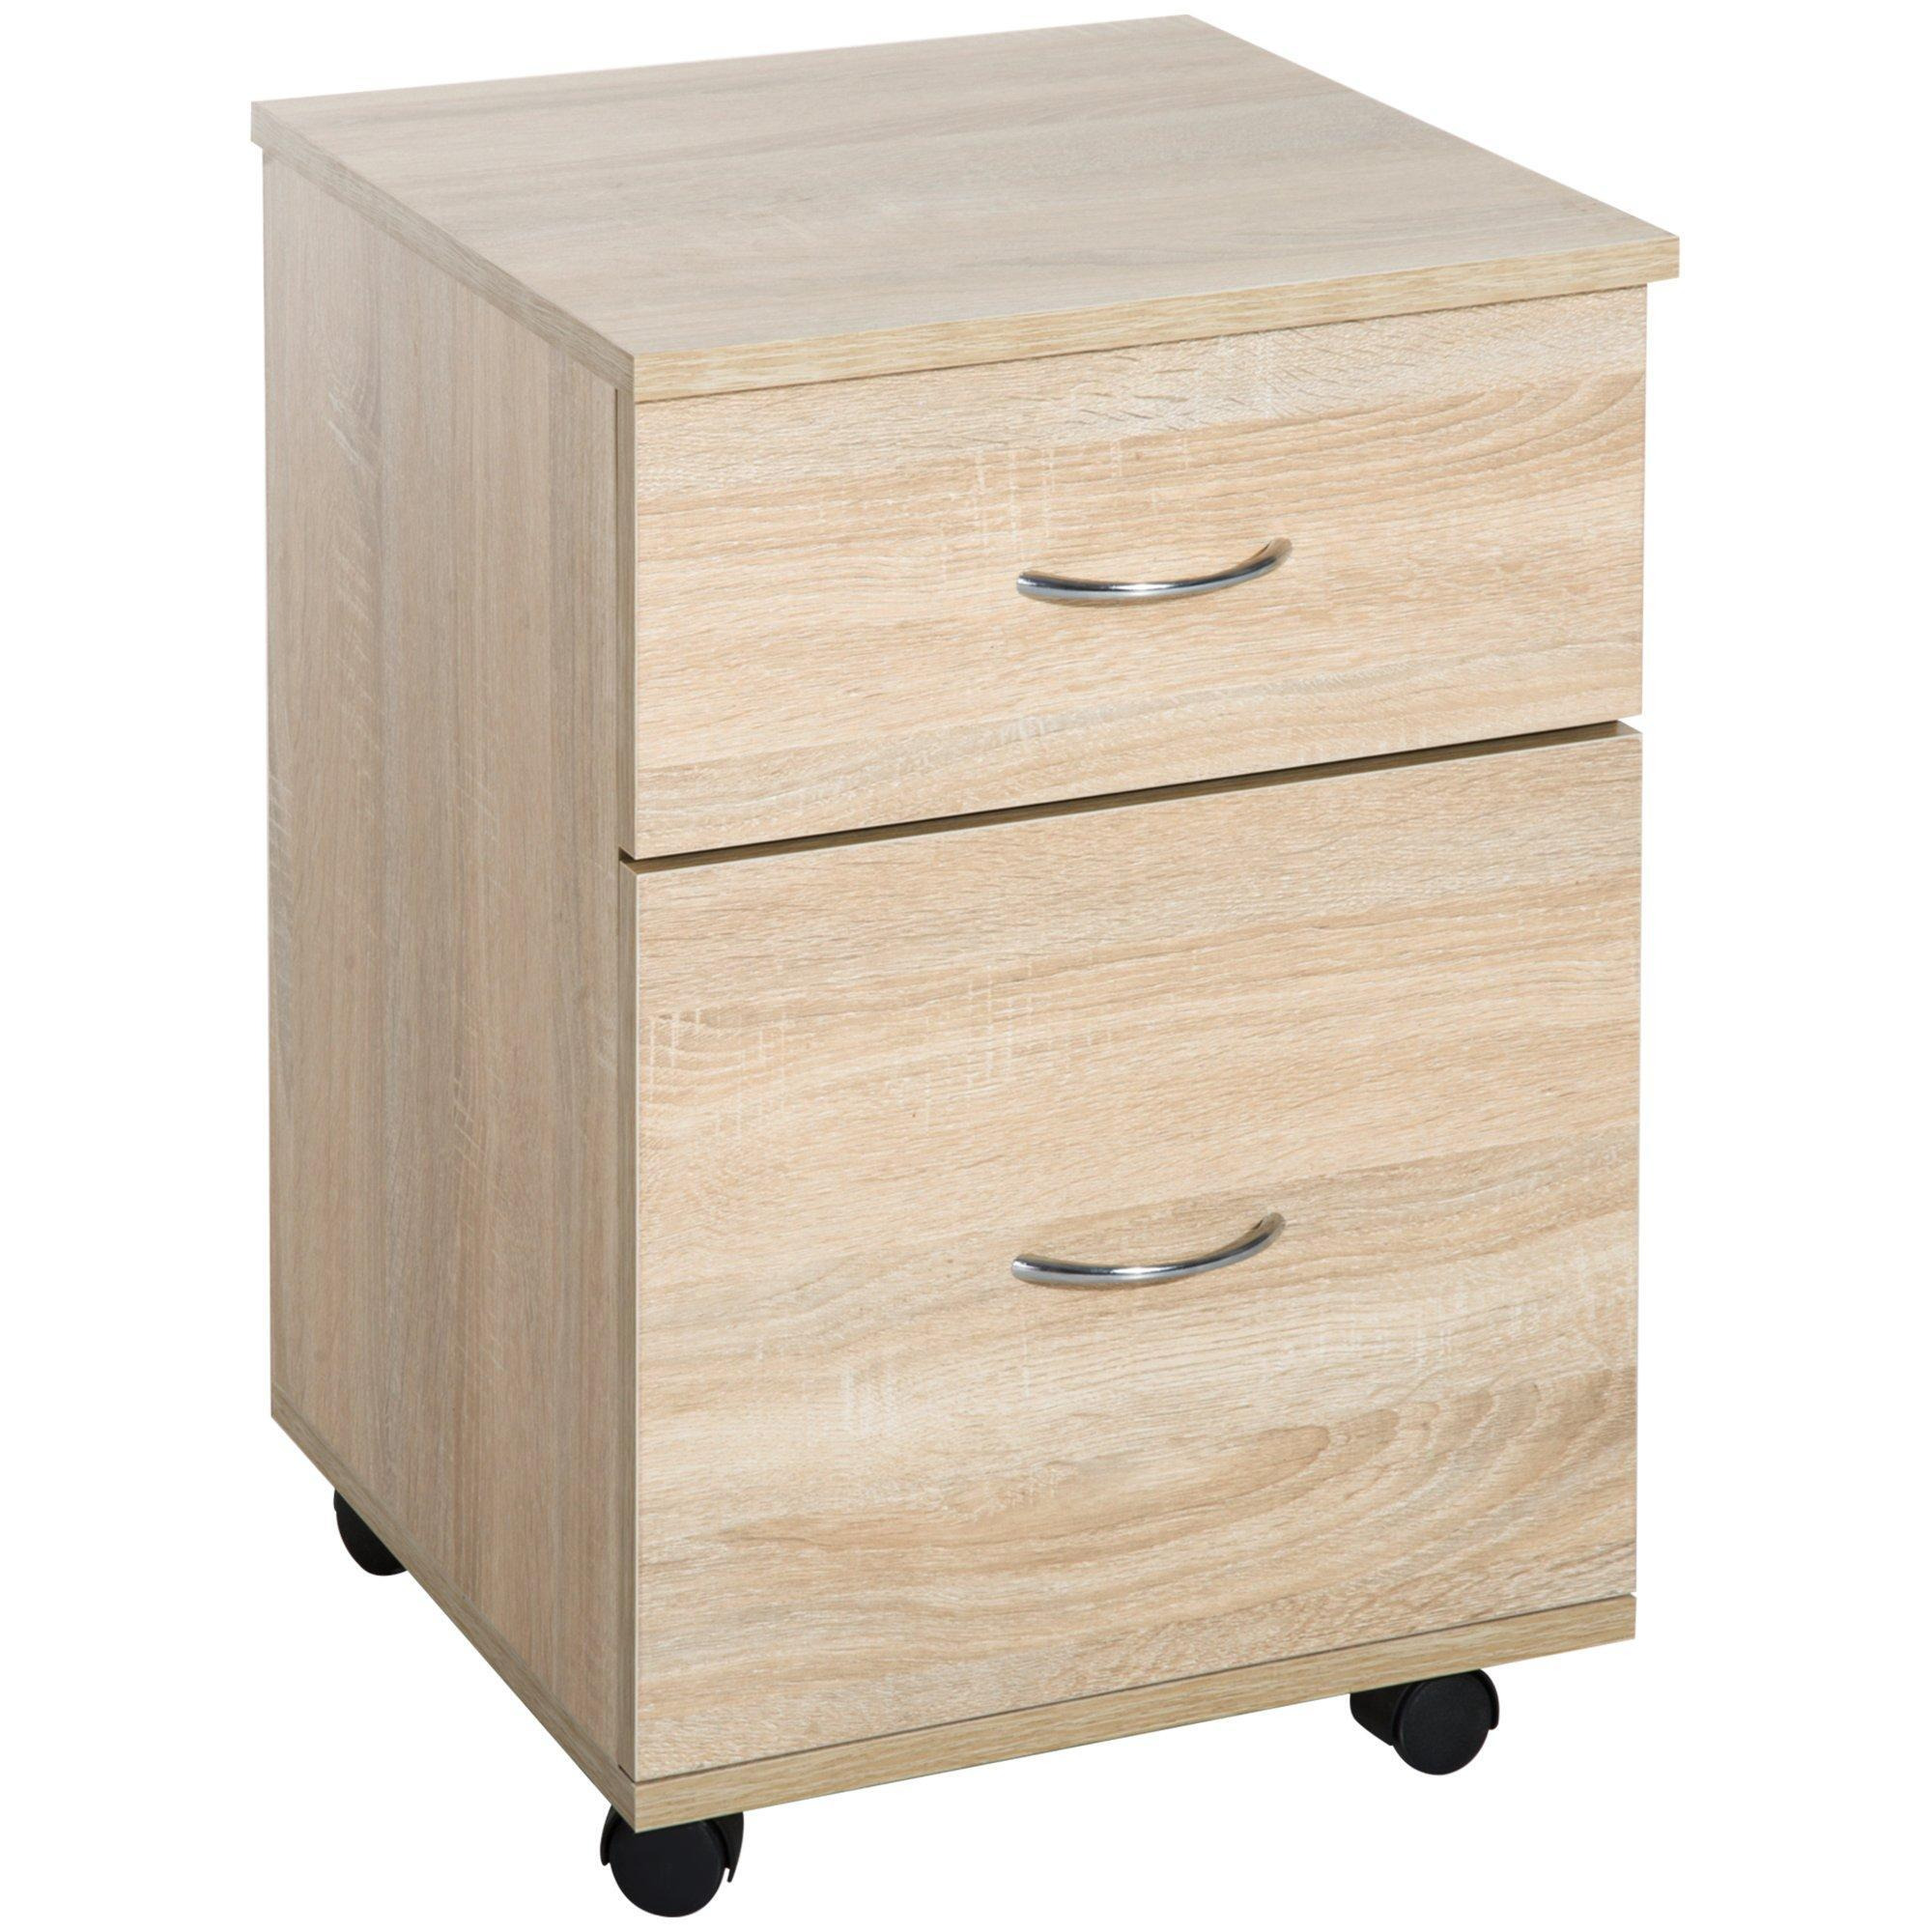 Mobile File Cabinet Wooden Side Table with 2 Drawers Pedestal Office - image 1